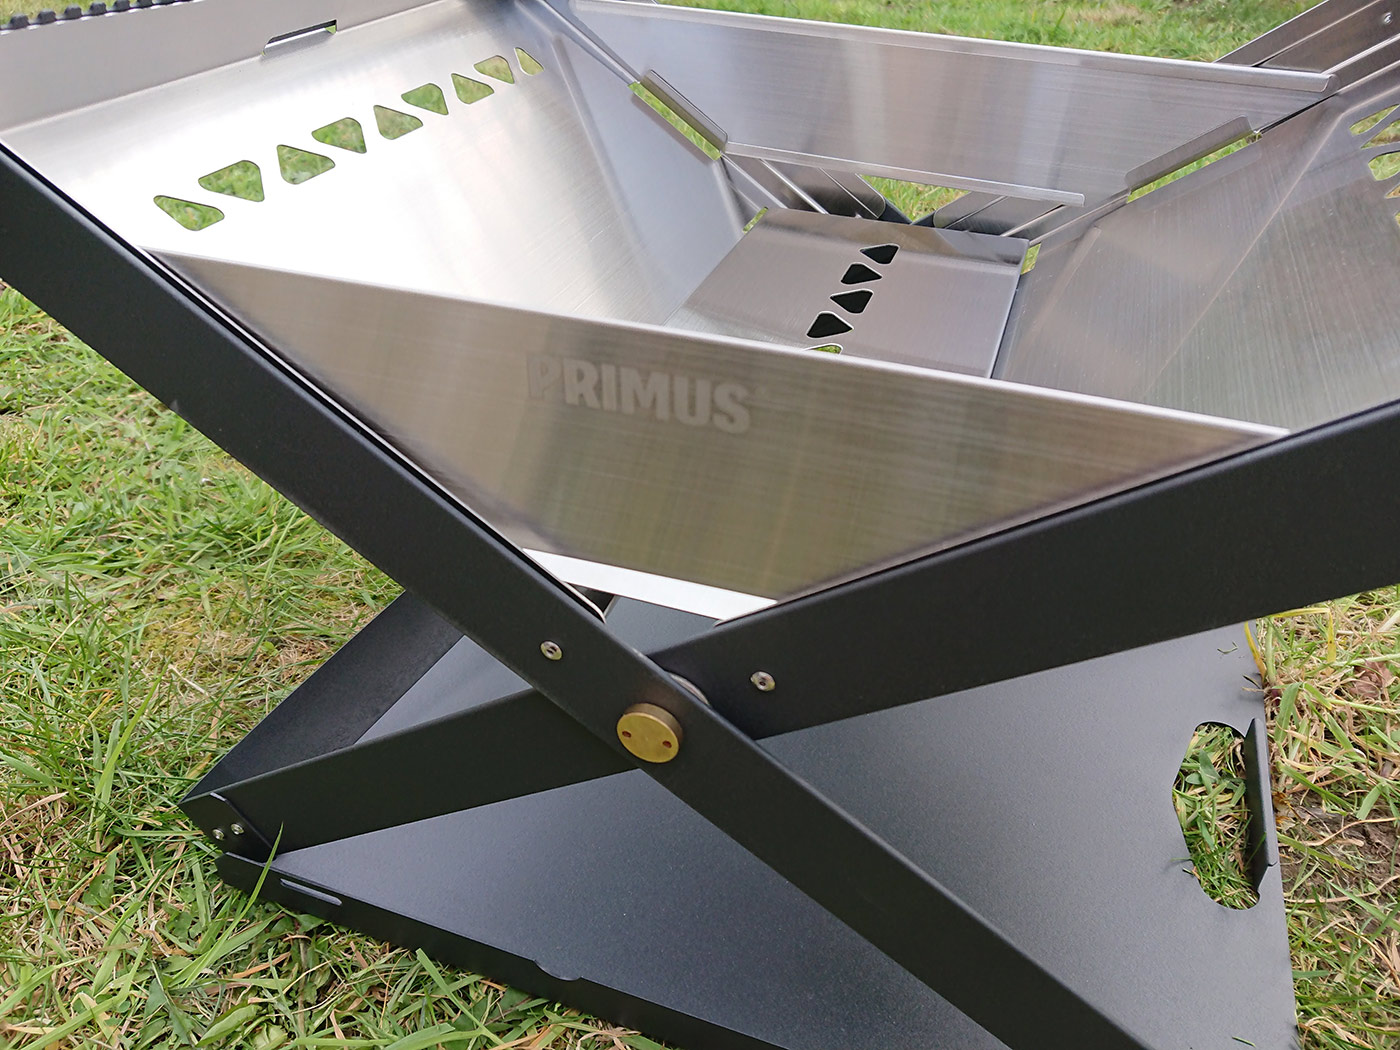 Primus Kamoto Openfire Large Fire Pit, Primus Fire Pit